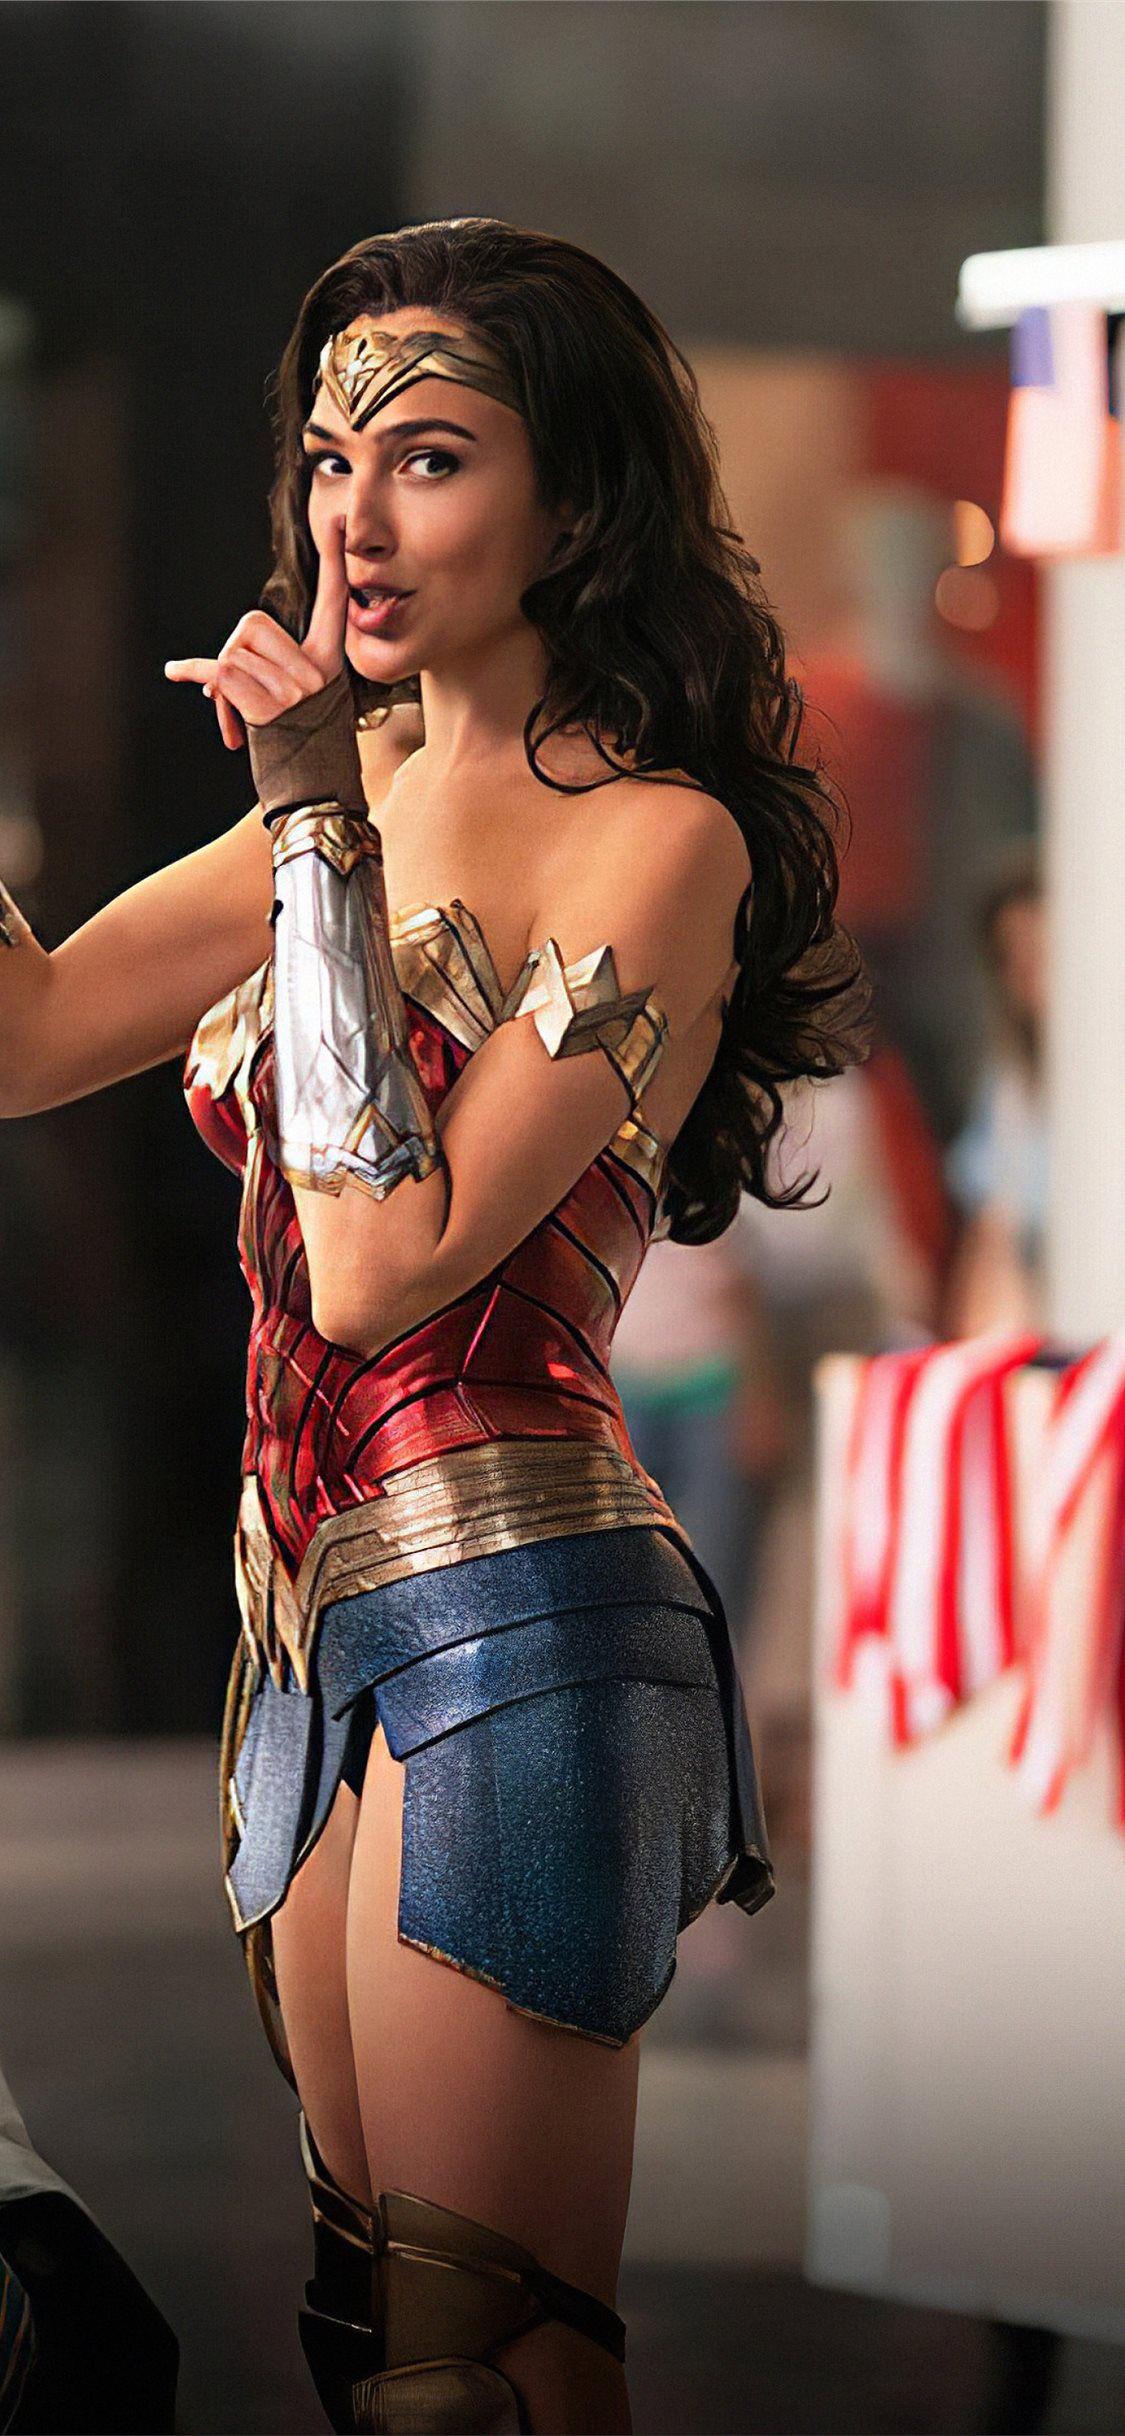 I really want to dominate Gal Gadot in her Wonder Woman attire